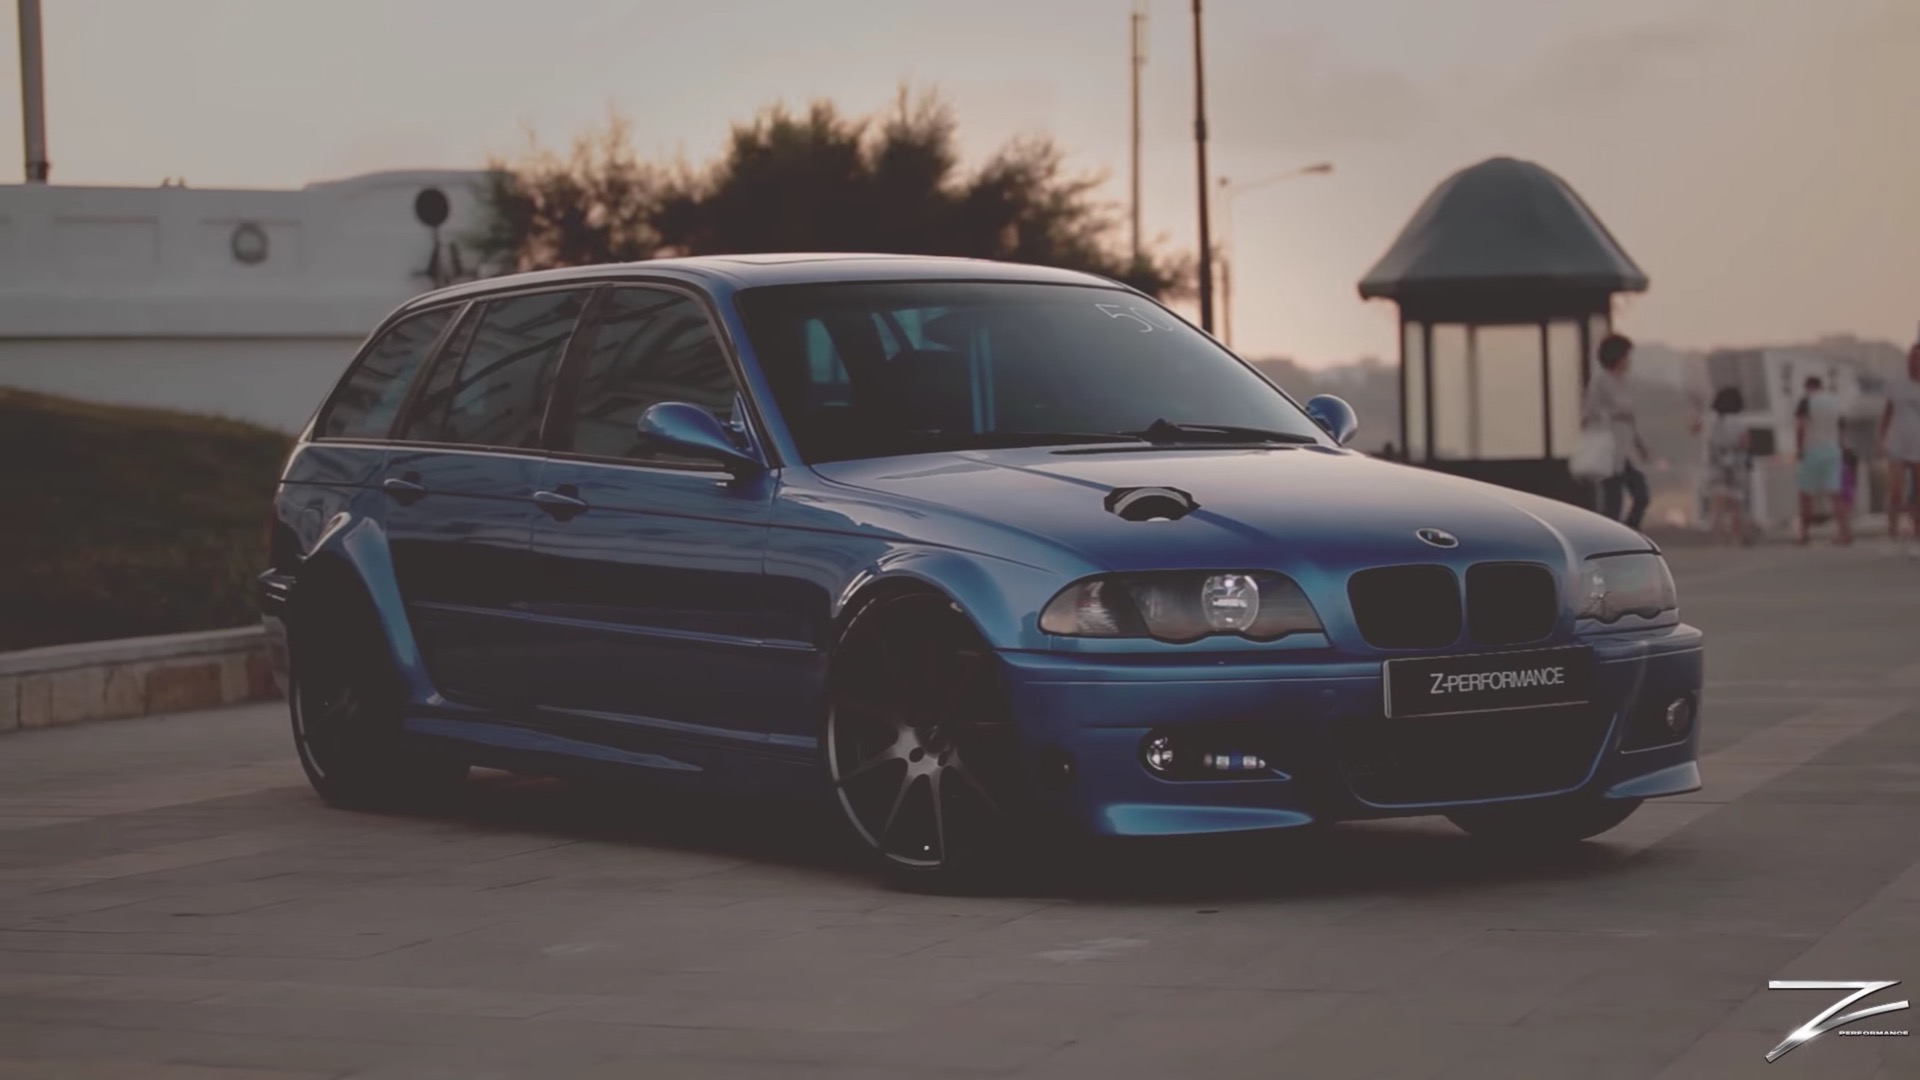 BMW M3 Turbo E46 Touring With 800 HP.